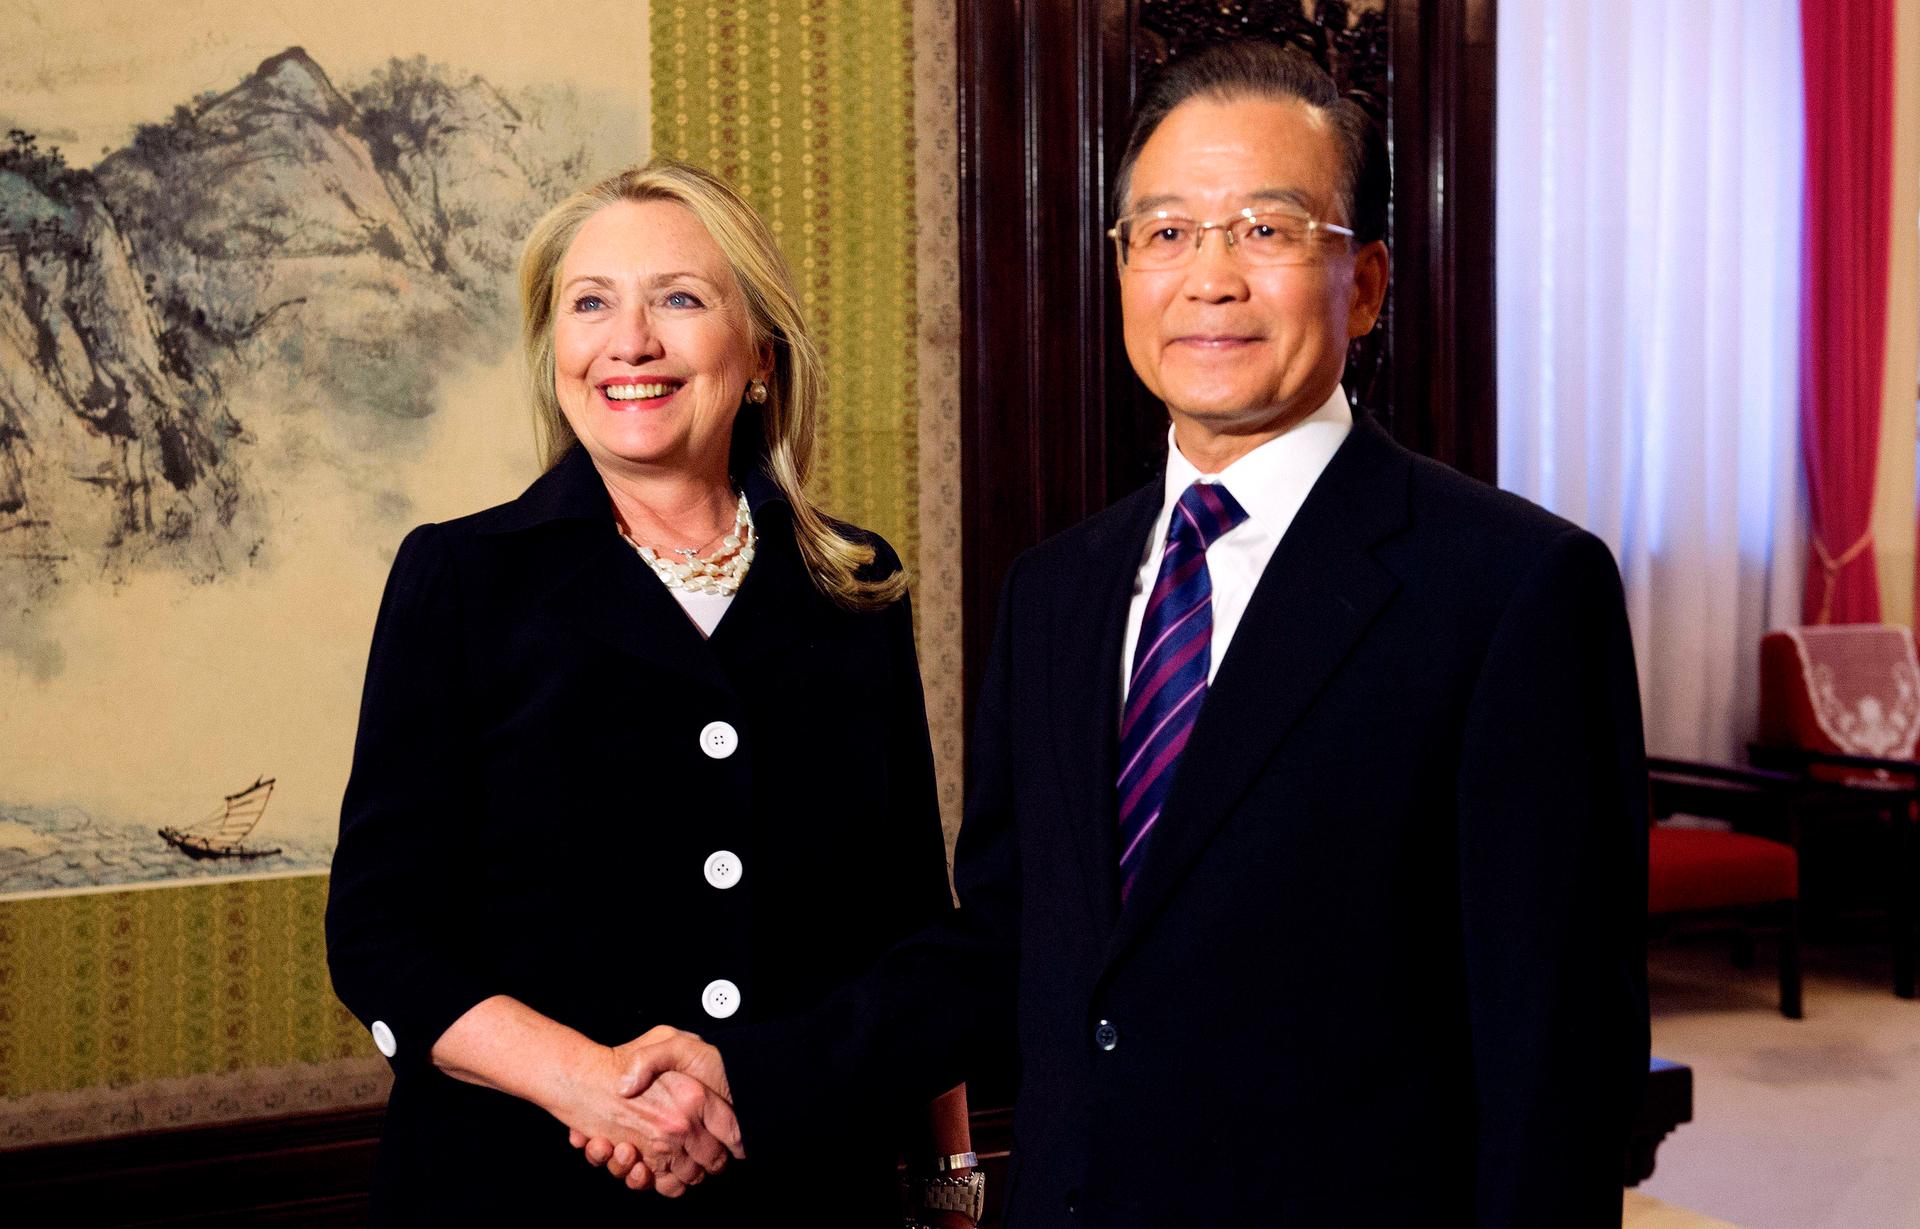 Chinese Premier Wen Jiabao and US Secretary of State Hillary Clinton shake hands at the Ziguangge Pavilion in the Zhongnanhai leaders' compound in Beijing on September 5, 2012.